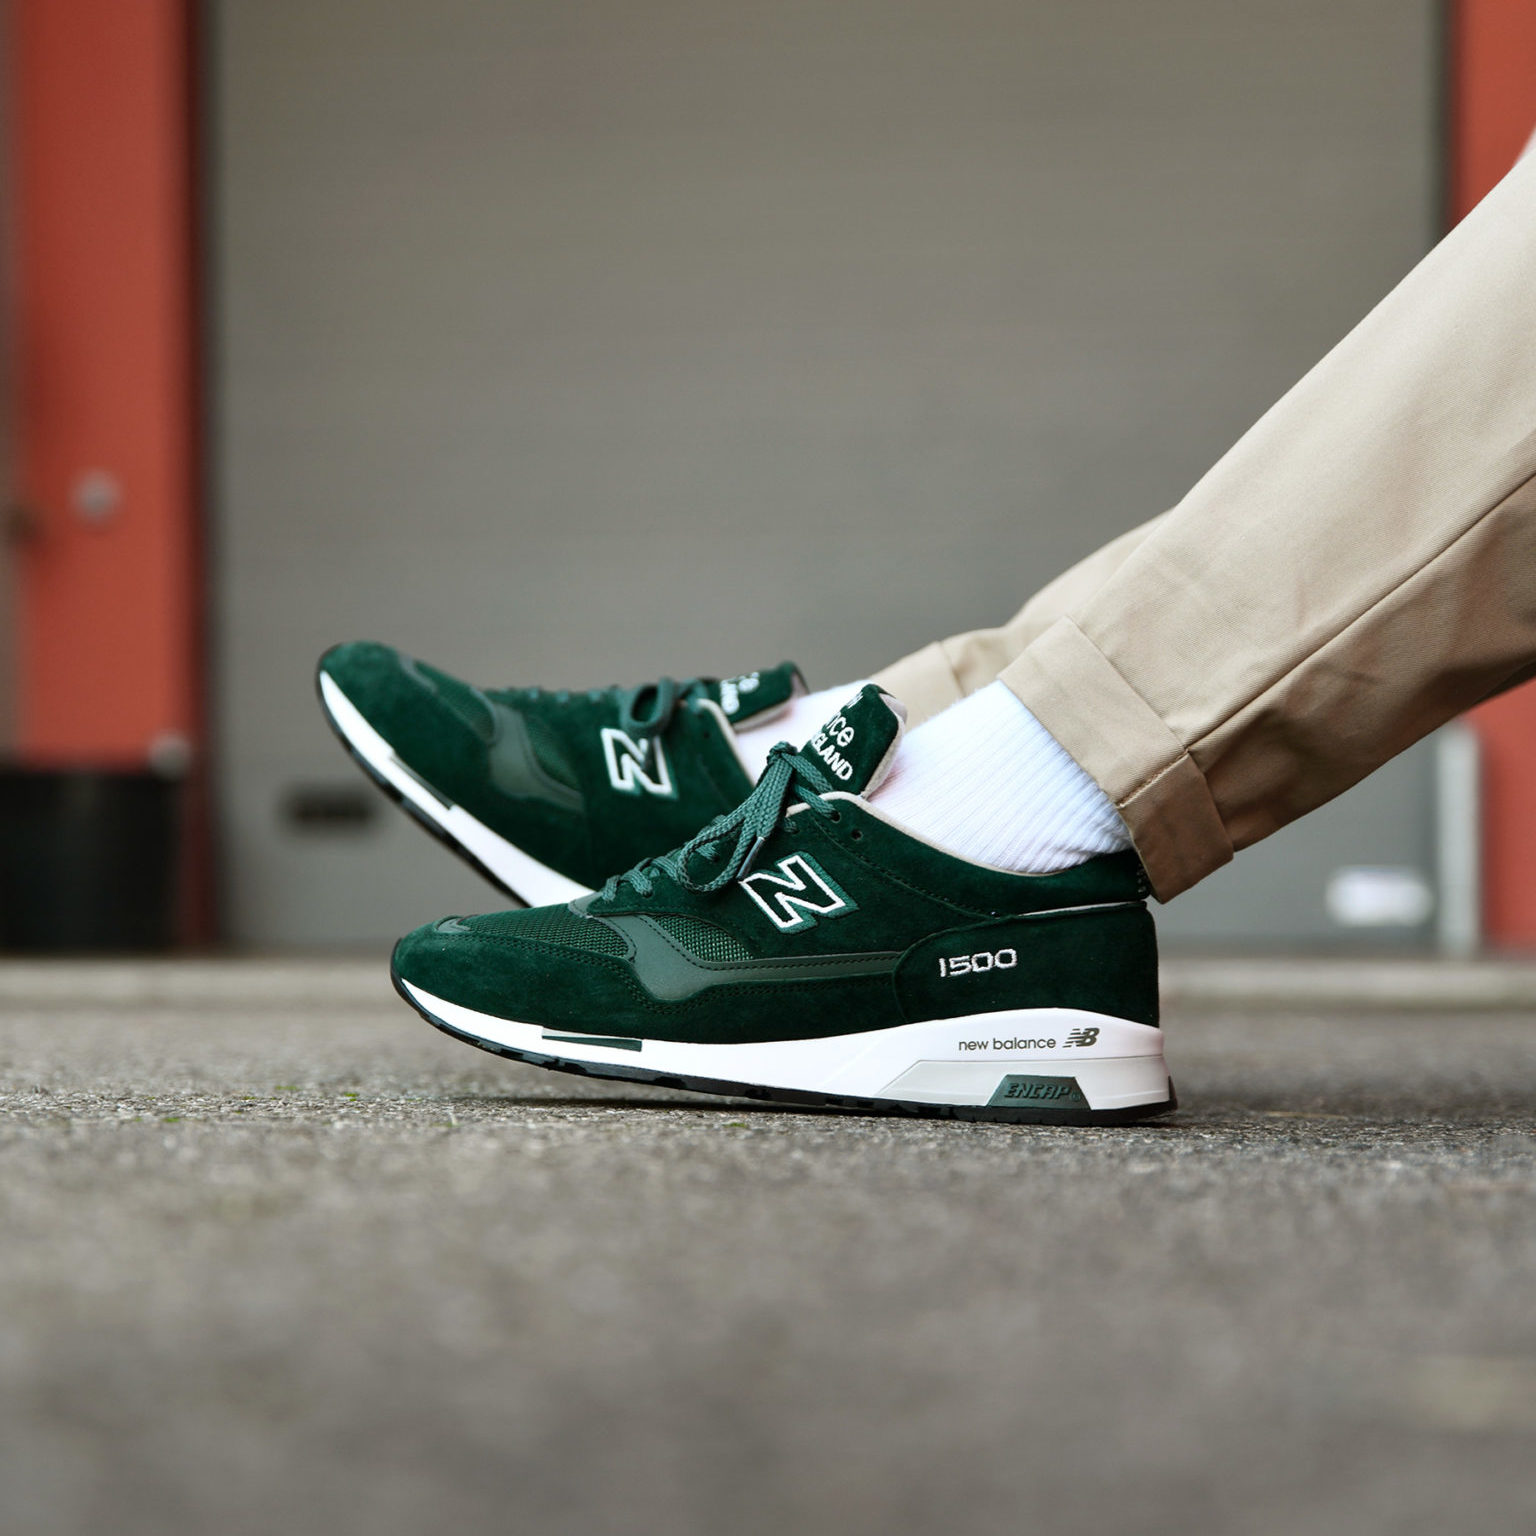 New Balance 1500 DGW - Made in UK - Sneakers.fr